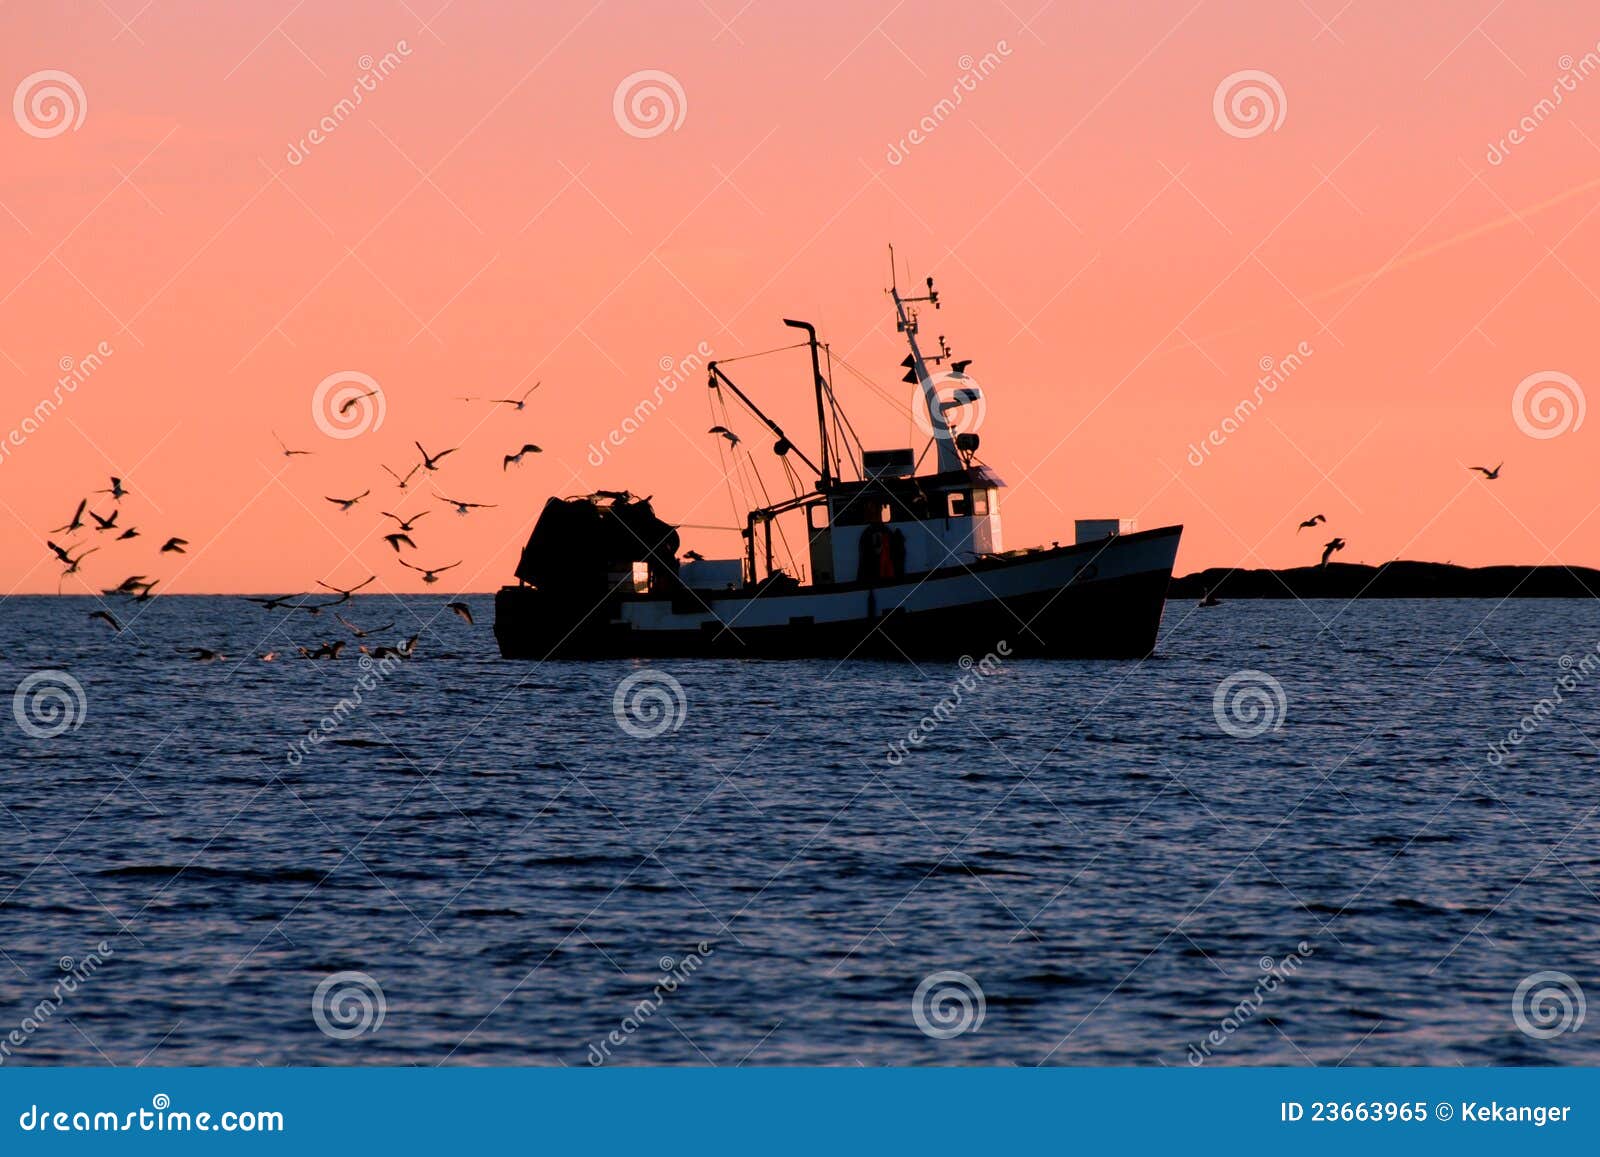 Fishing boat in silhouette stock image. Image of mast    